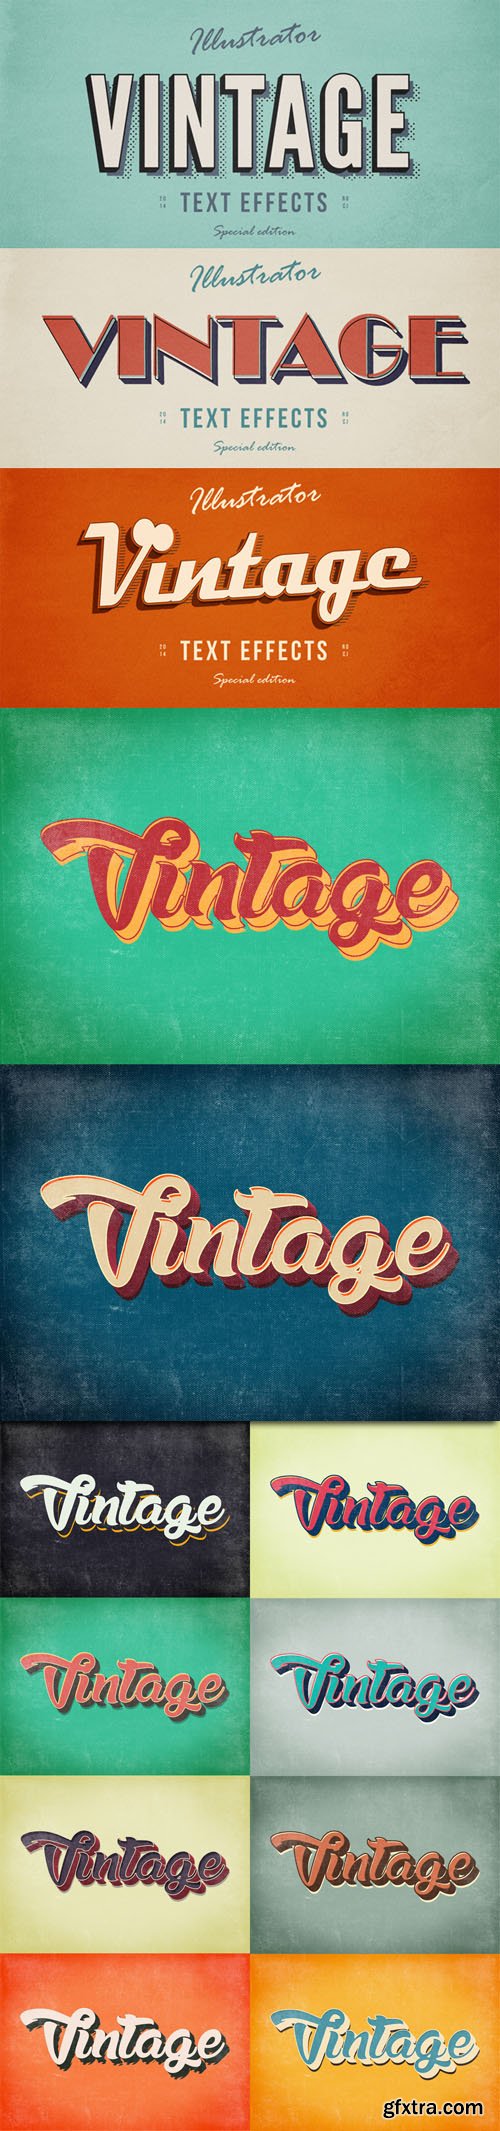 13 Vintage Text Effects for Illustrator & Photoshop